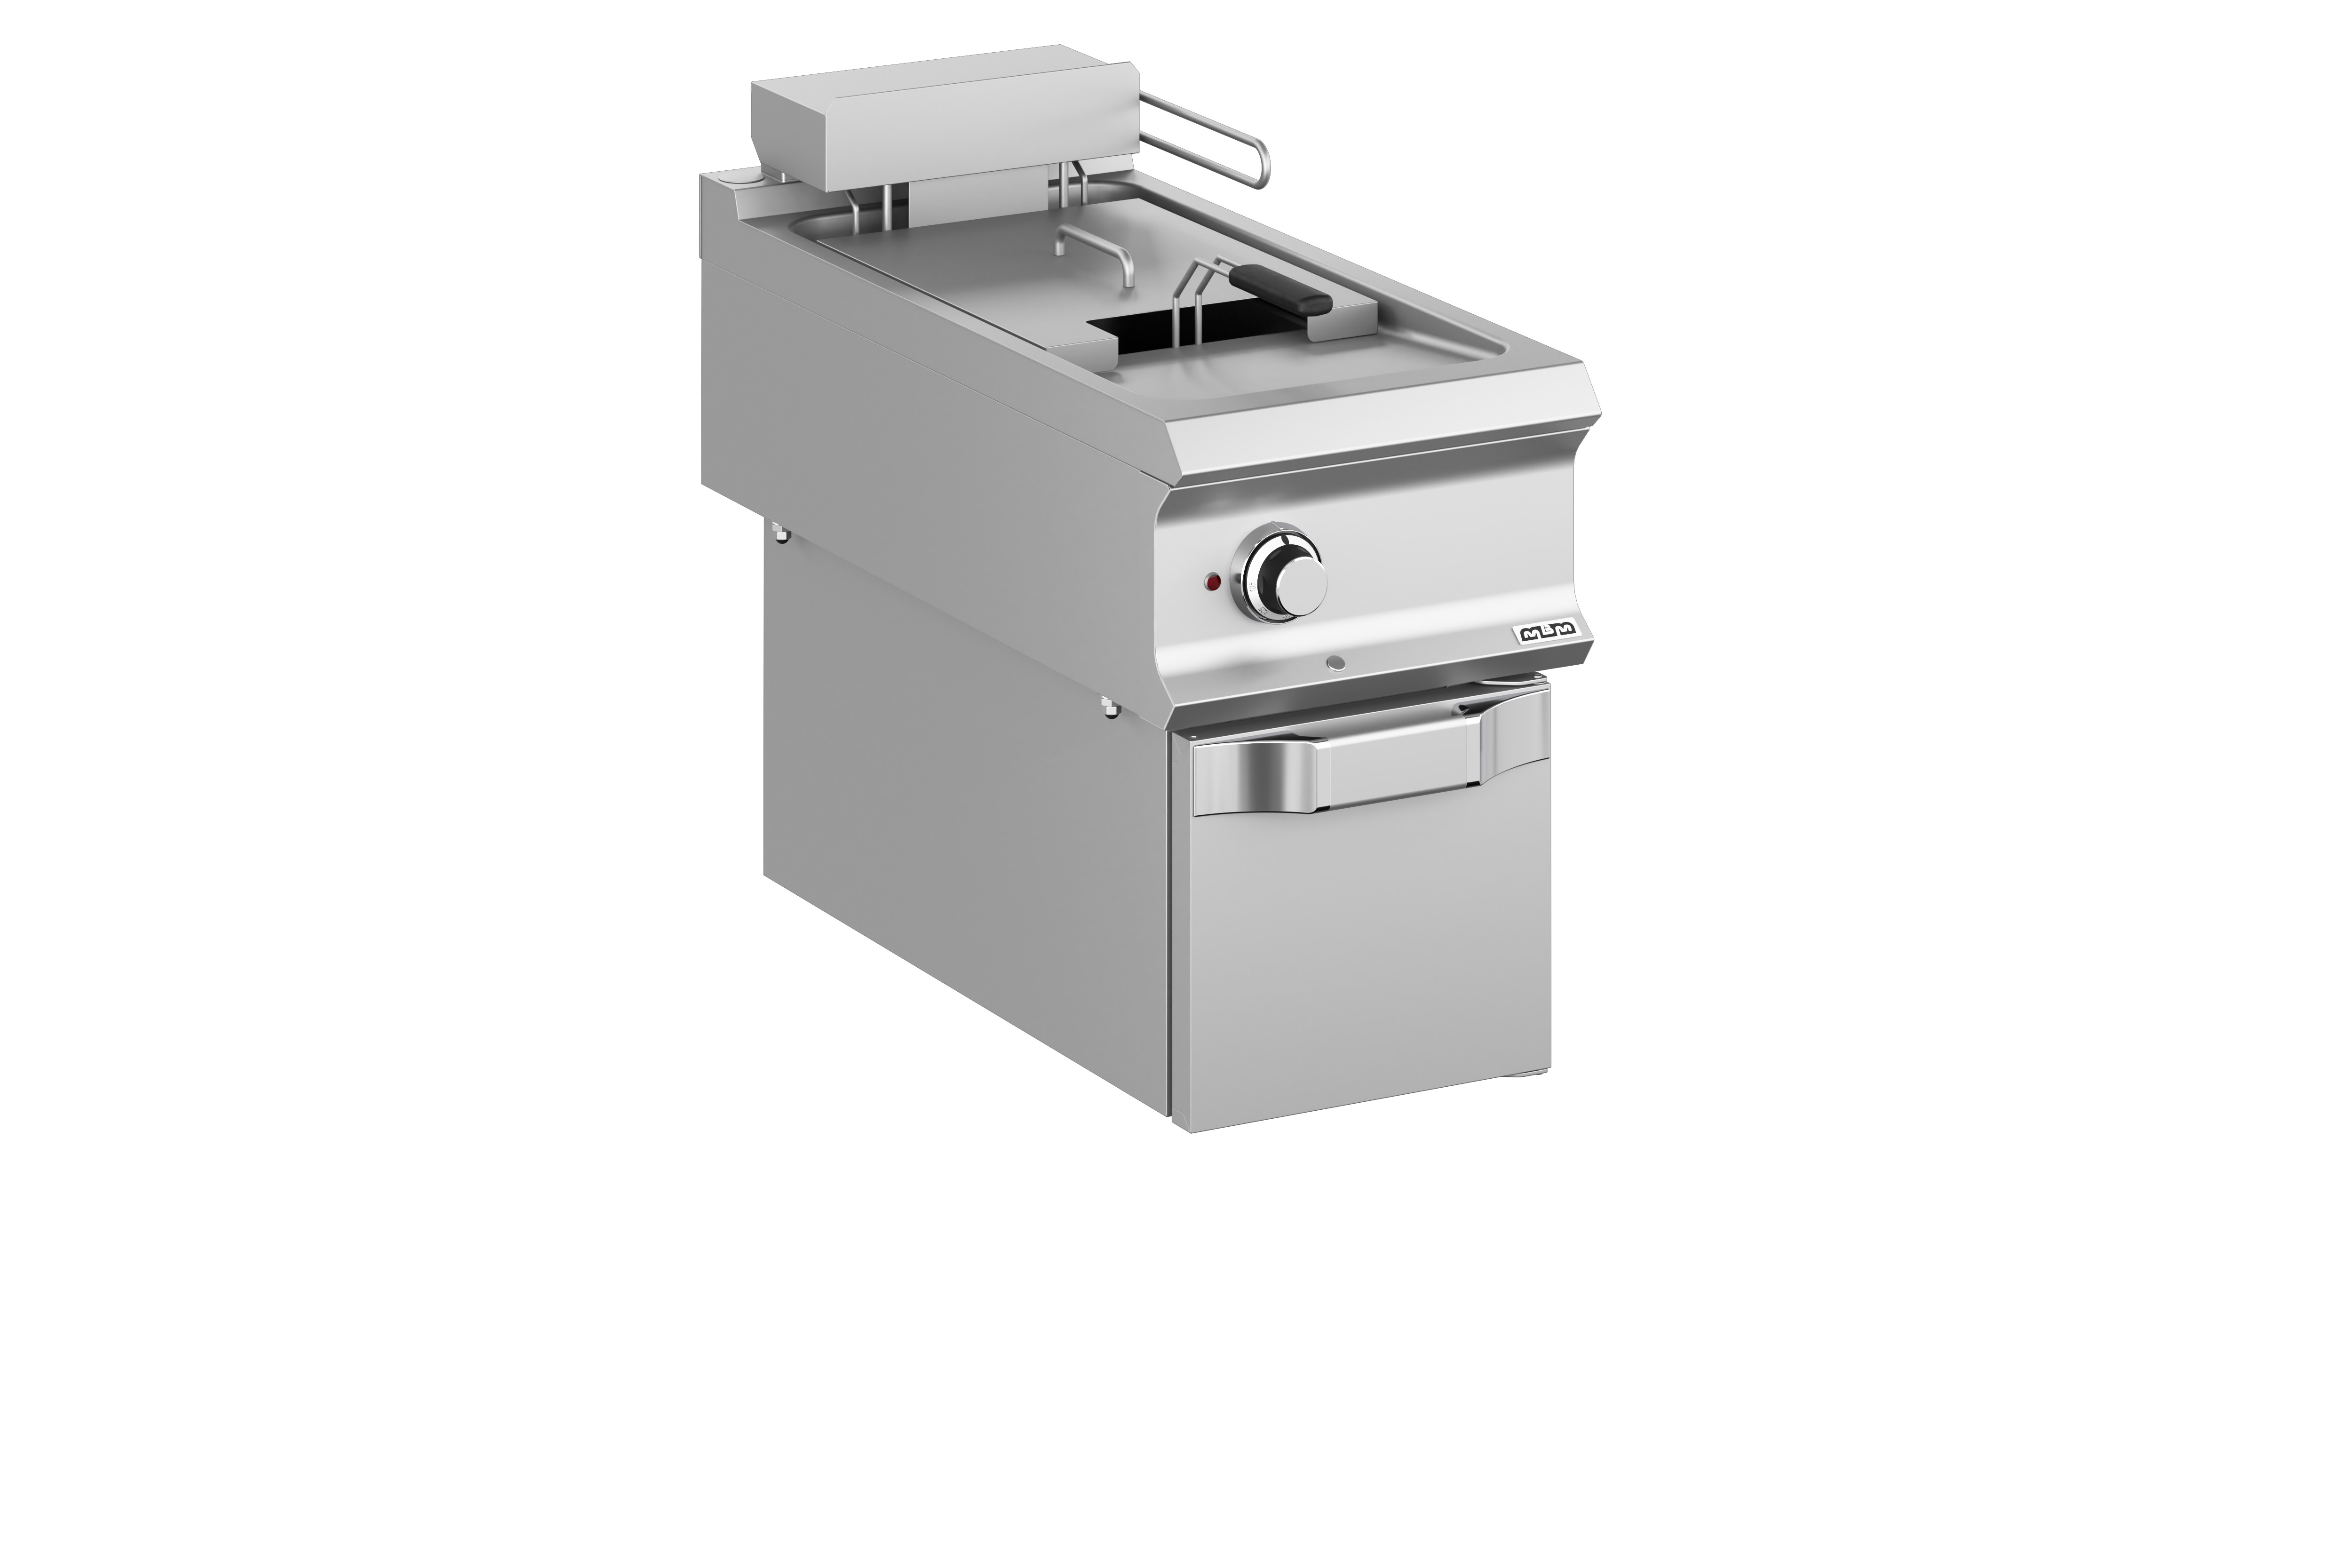 Domina Pro 900 FRBE94T Single Bowl Electric Fryer Drop-in